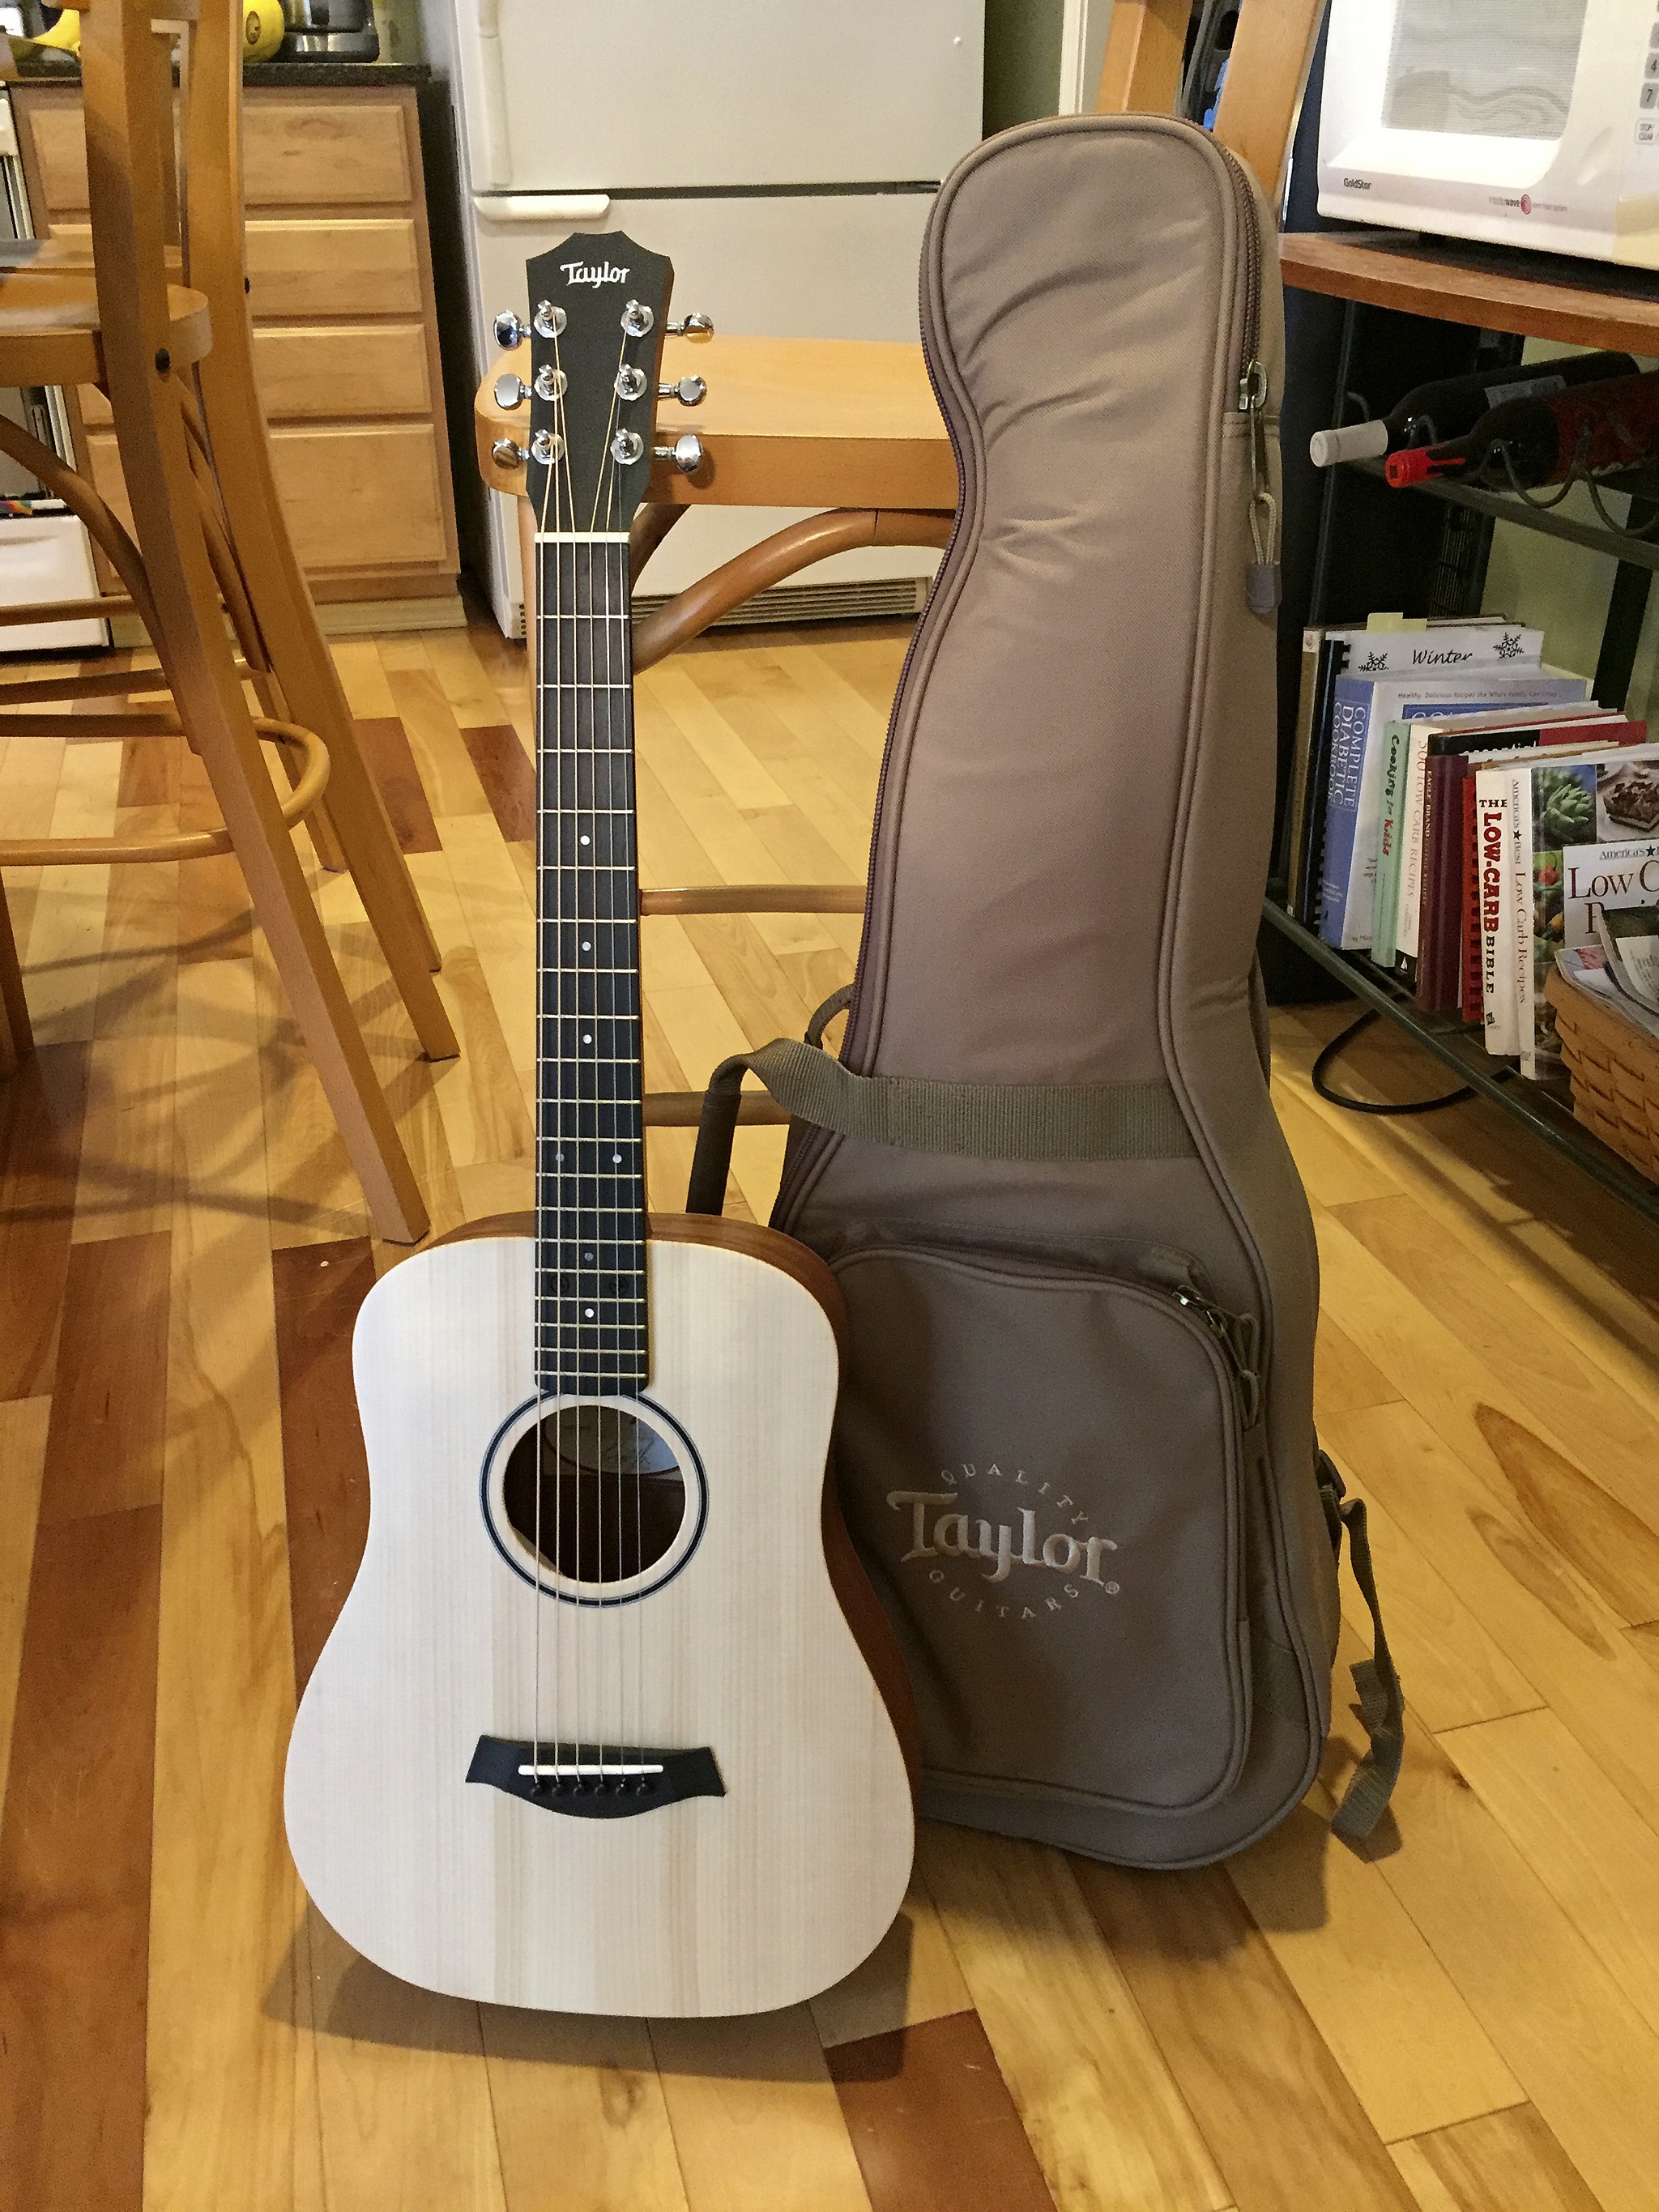 An acoustic guitar donated to Ostrem’s project by Taylor Guitars. (Courtesy Photo)